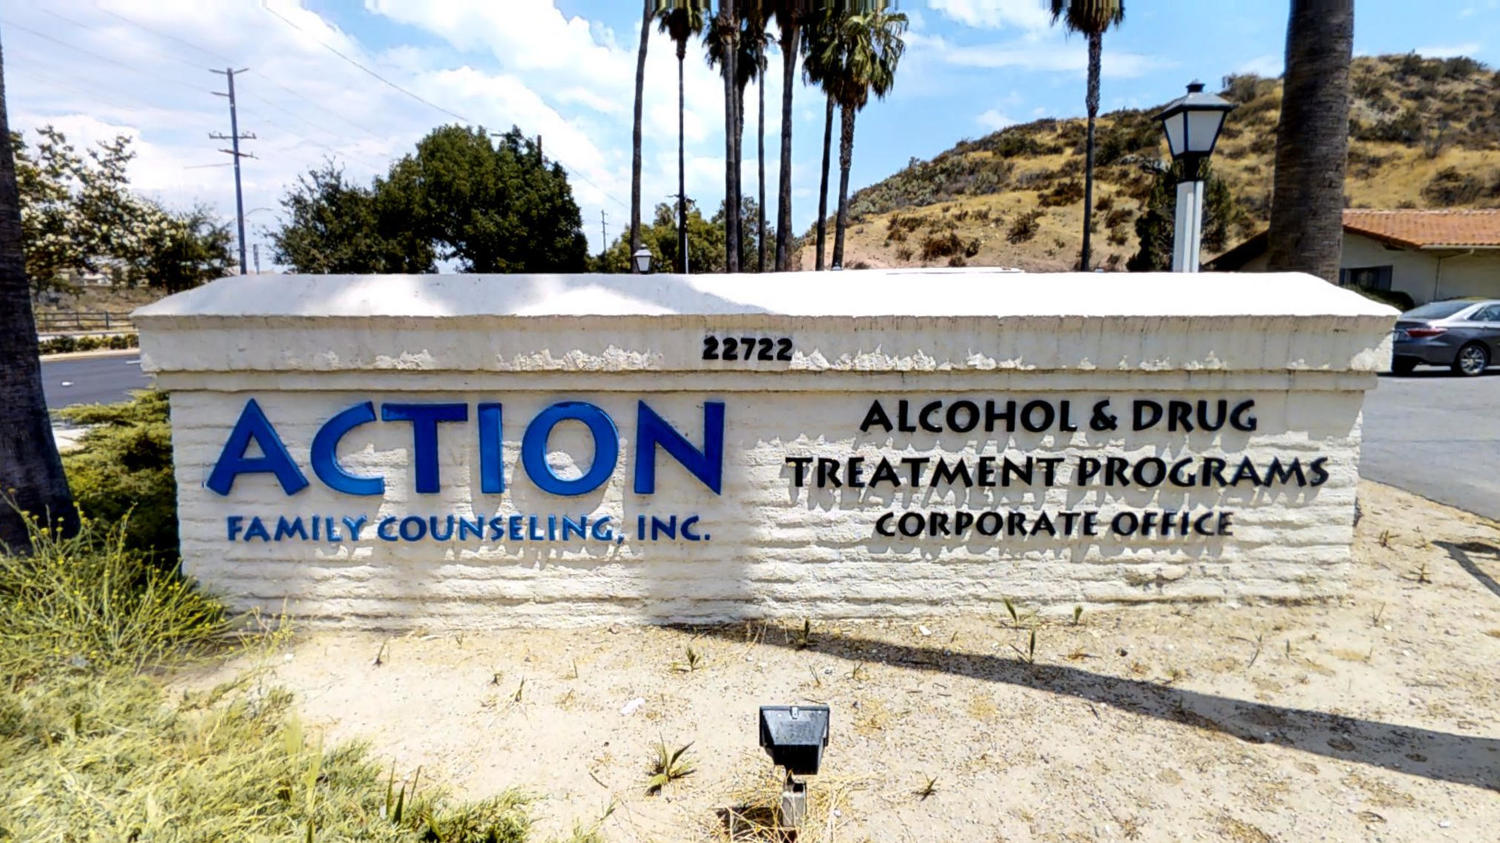 Gallery Photo of Action Family Counseling Drug and Alcohol Treatment Centers